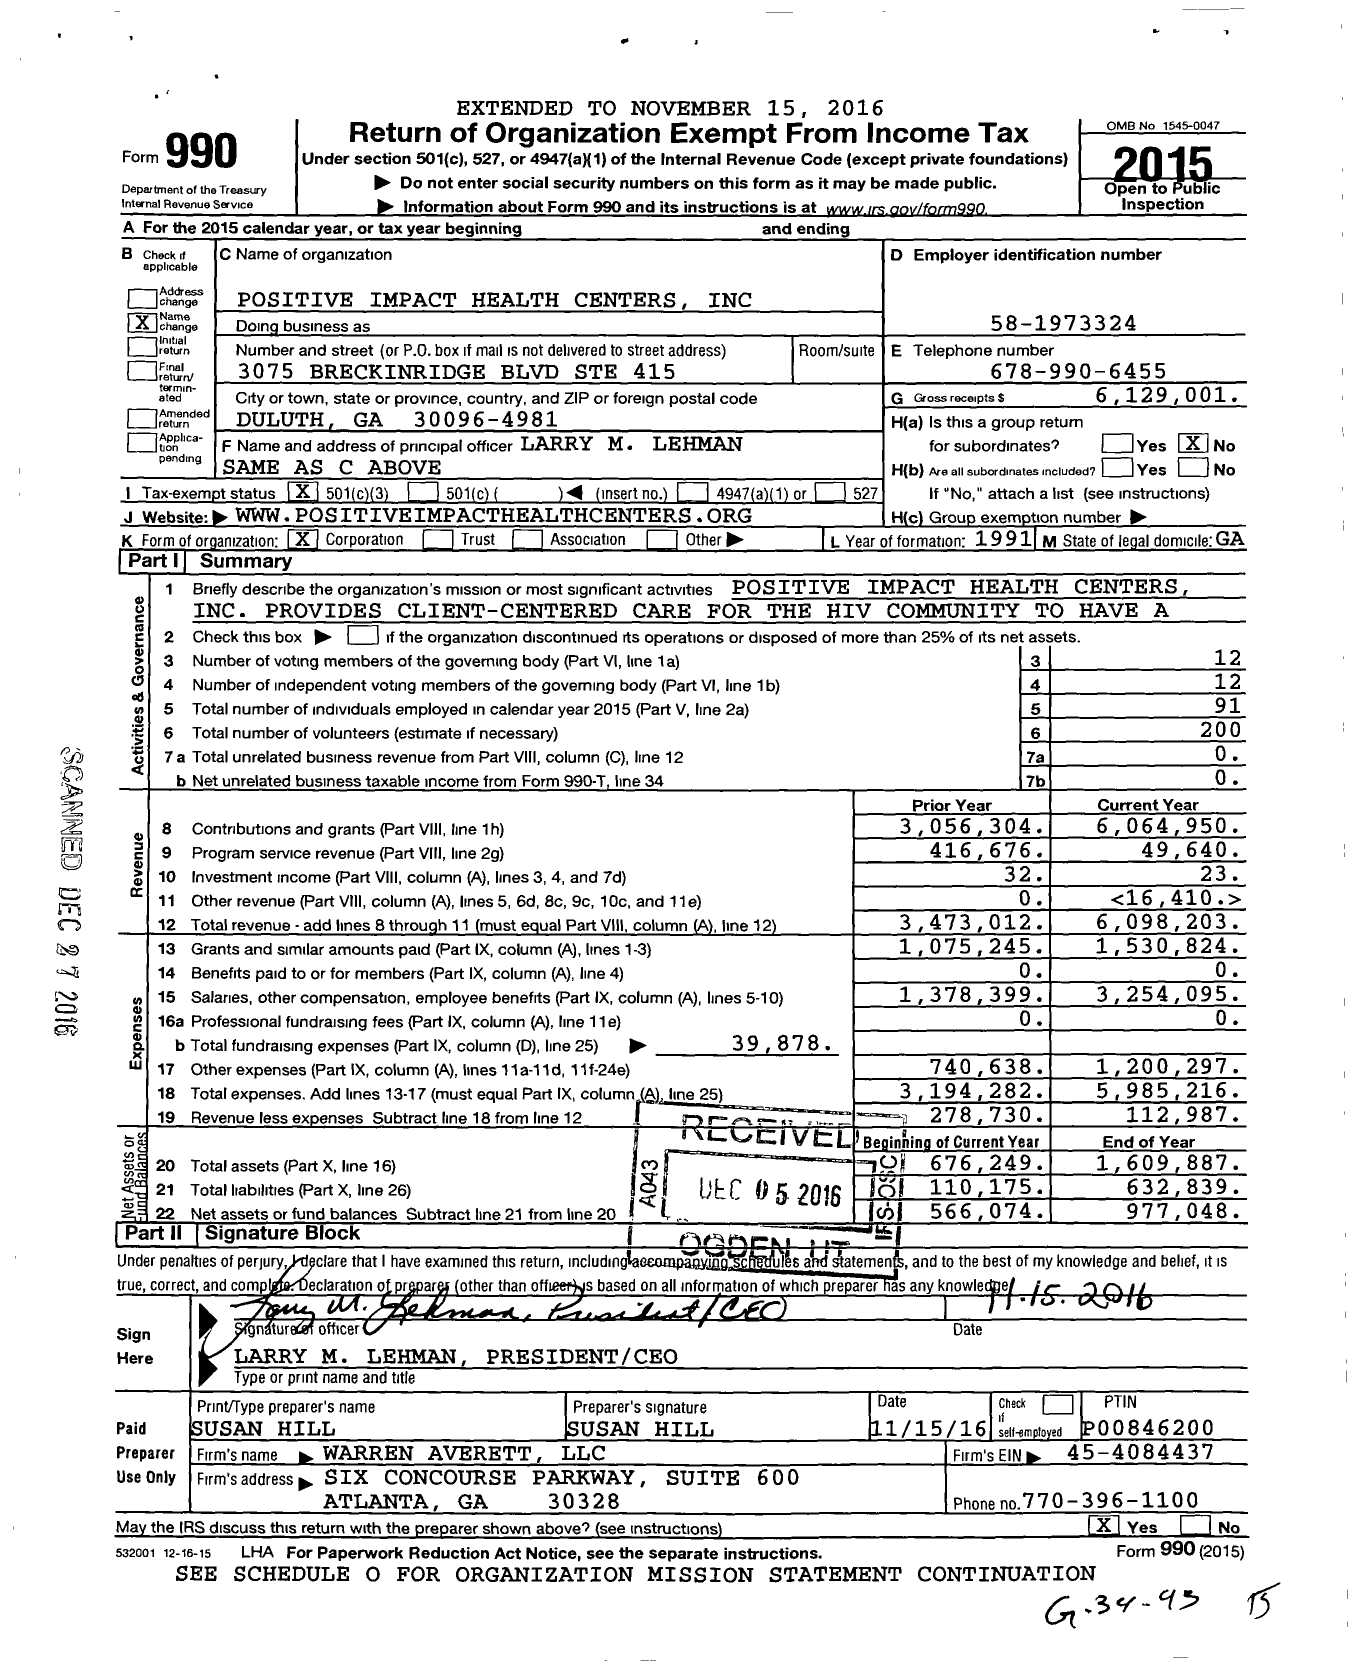 Image of first page of 2015 Form 990 for Positive Impact Health Centers